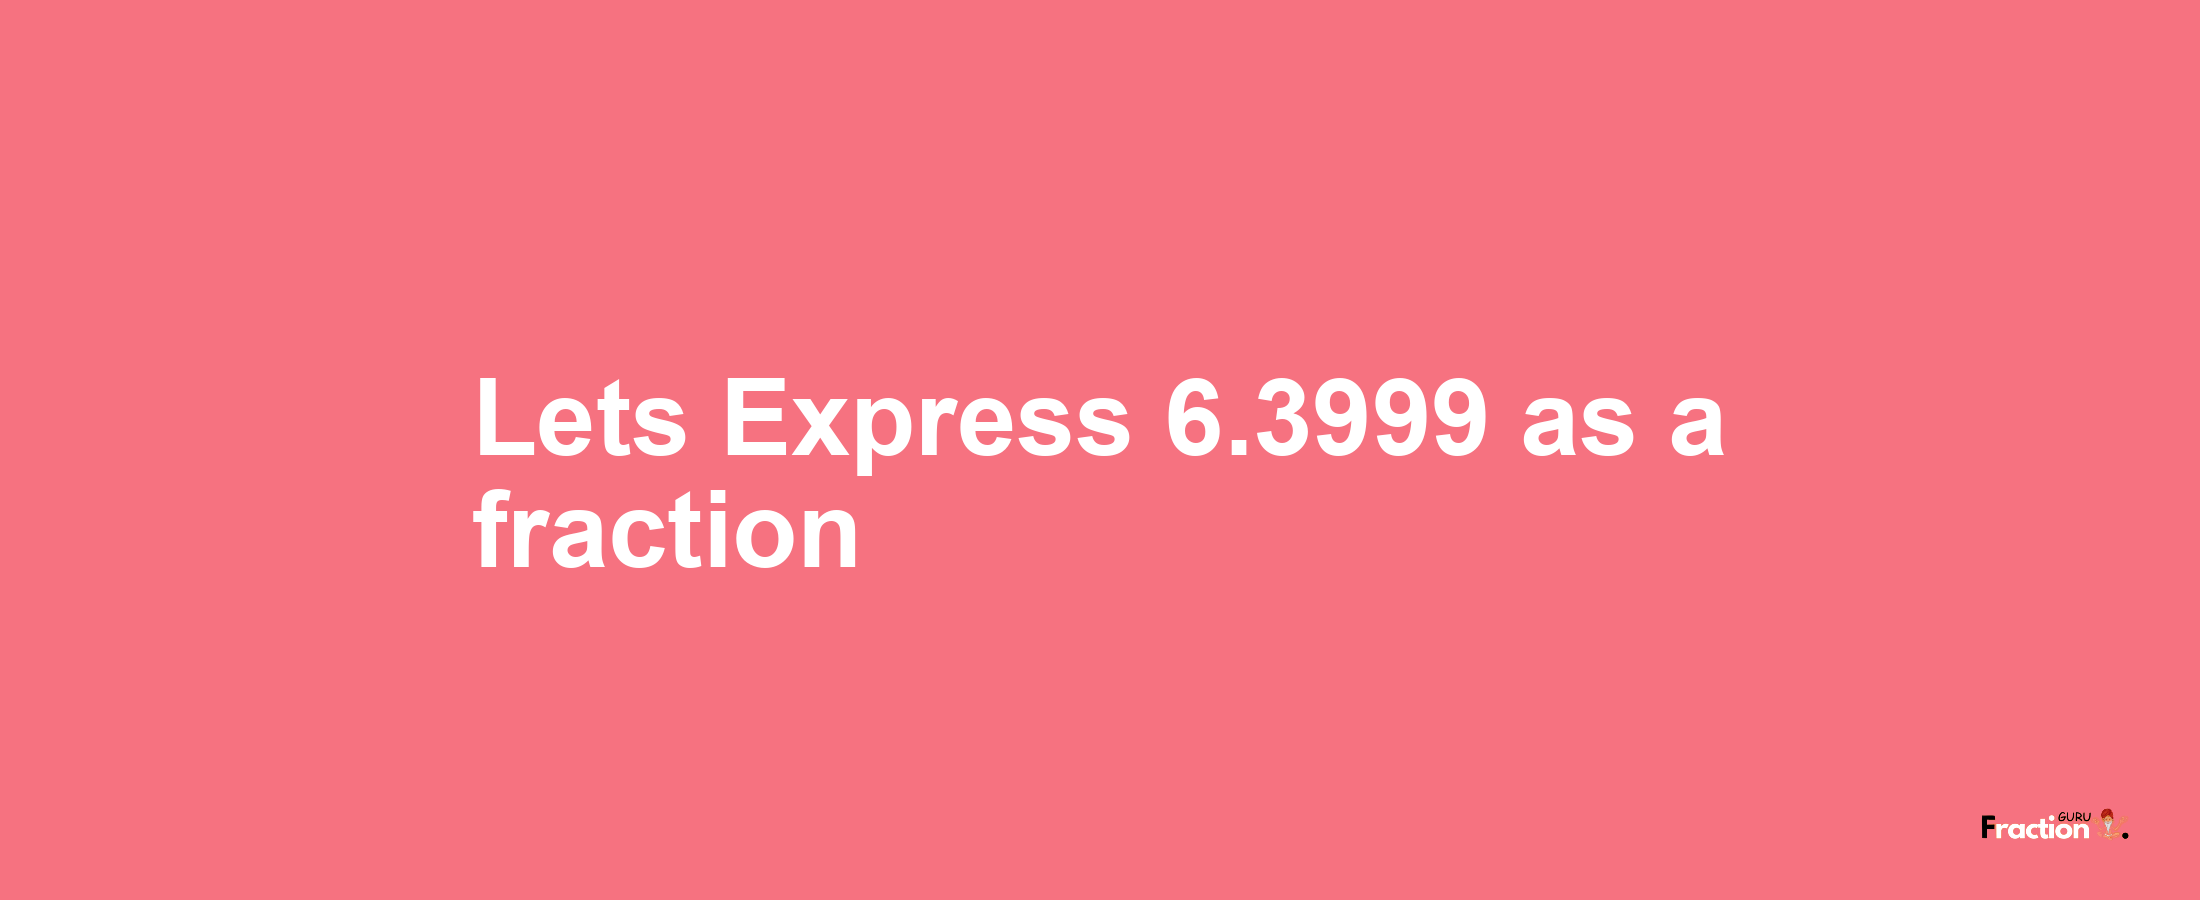 Lets Express 6.3999 as afraction